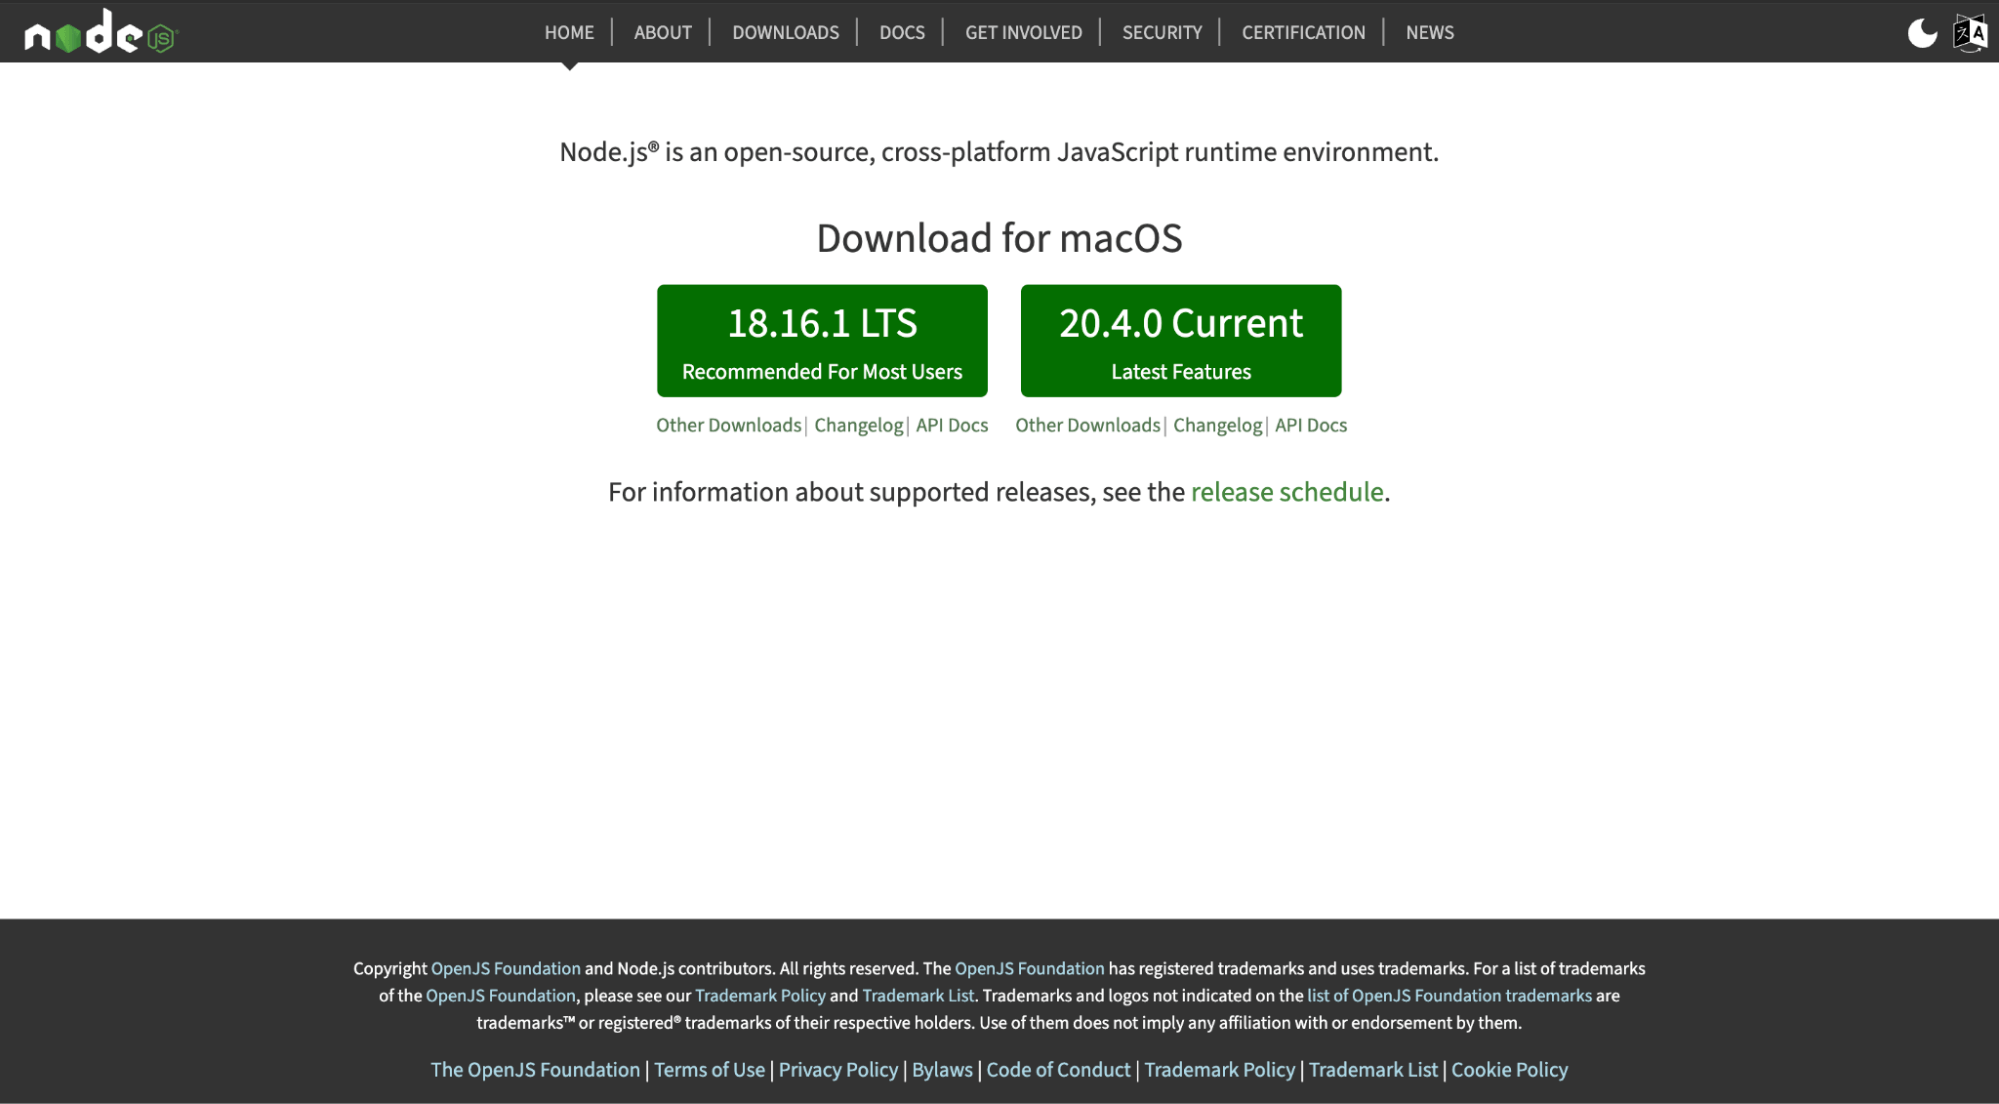 two download options